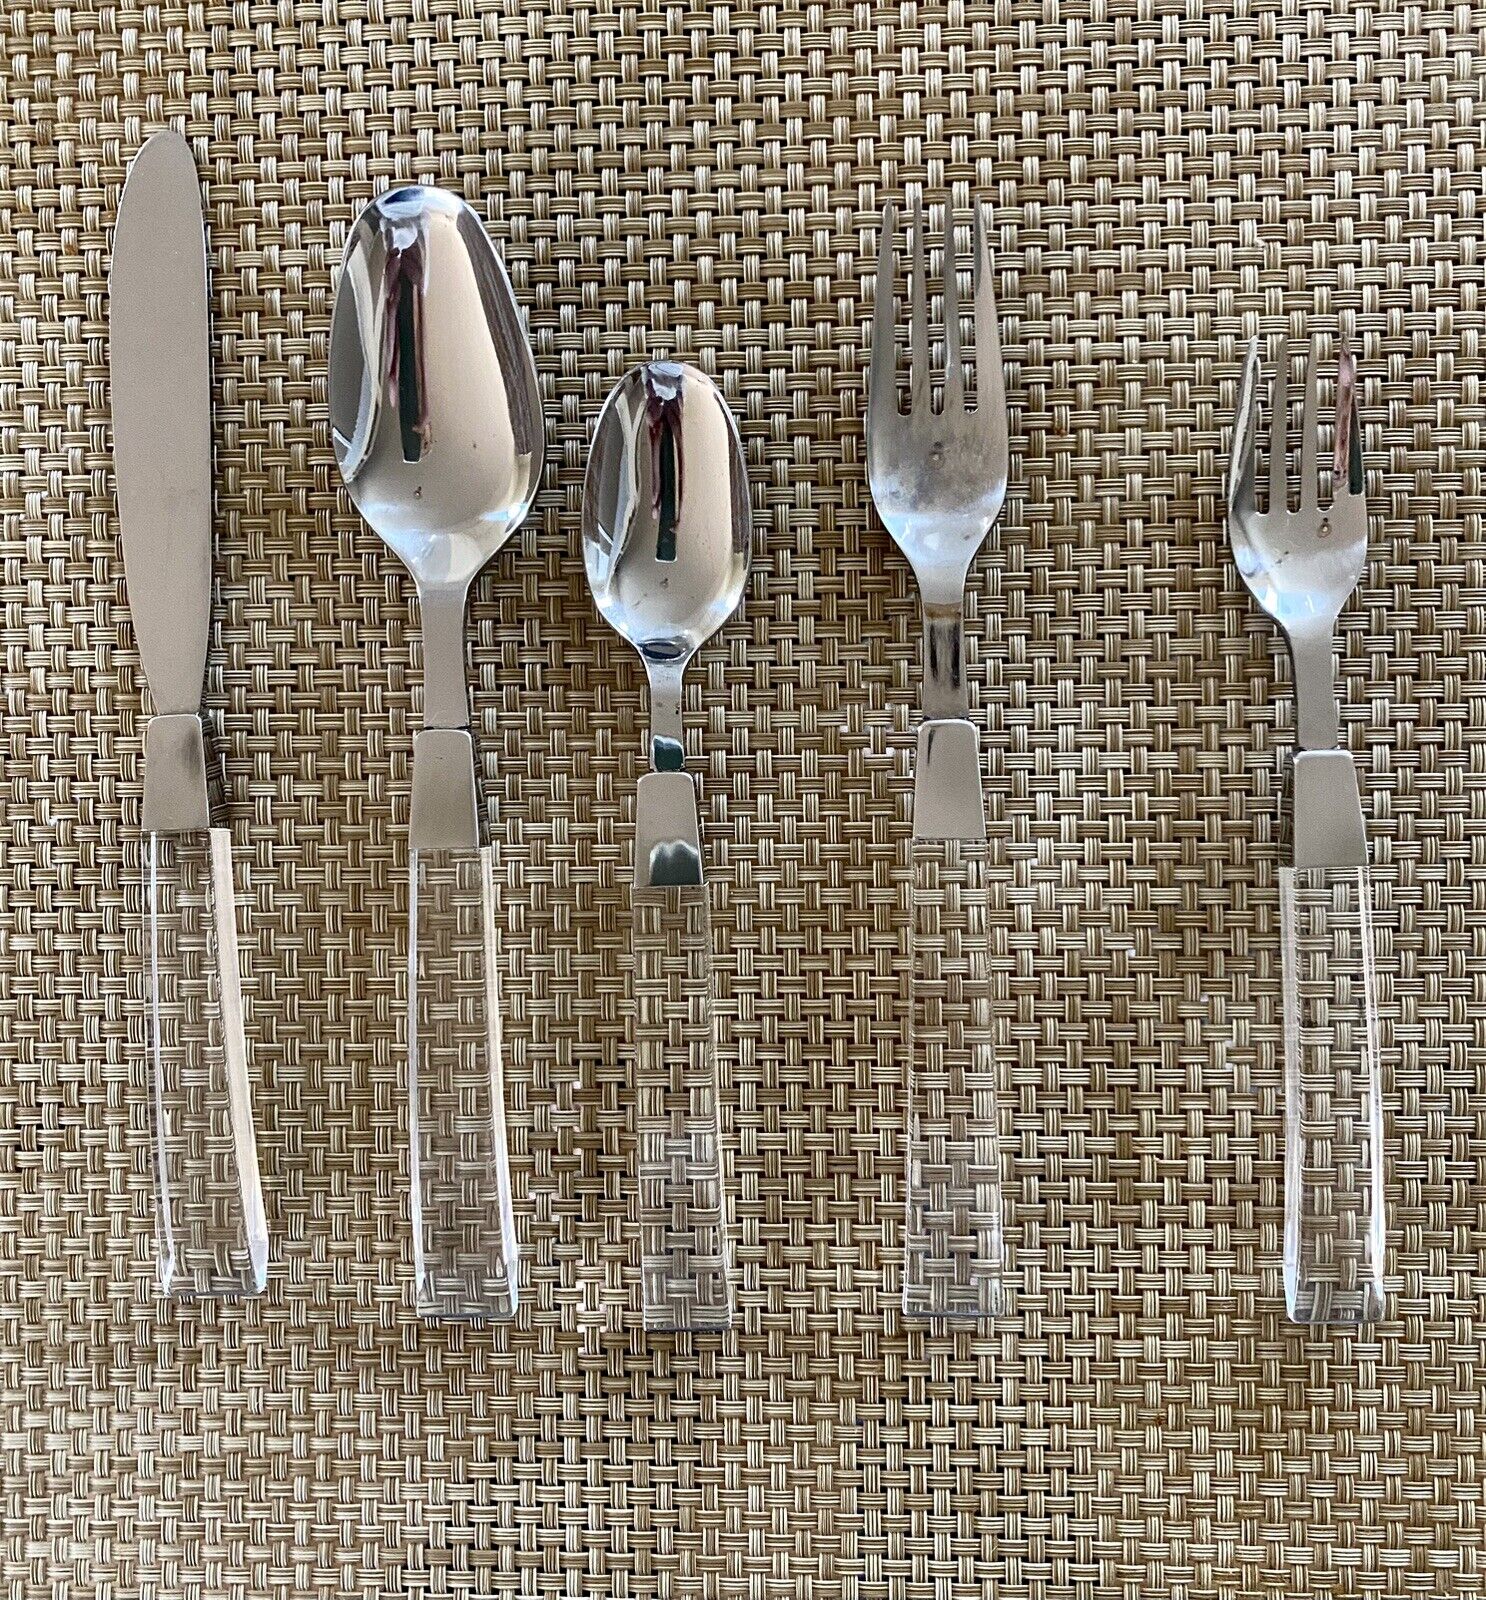 Vintage Lucite Stainless Steel Japan 5-pc Place Setting For 8